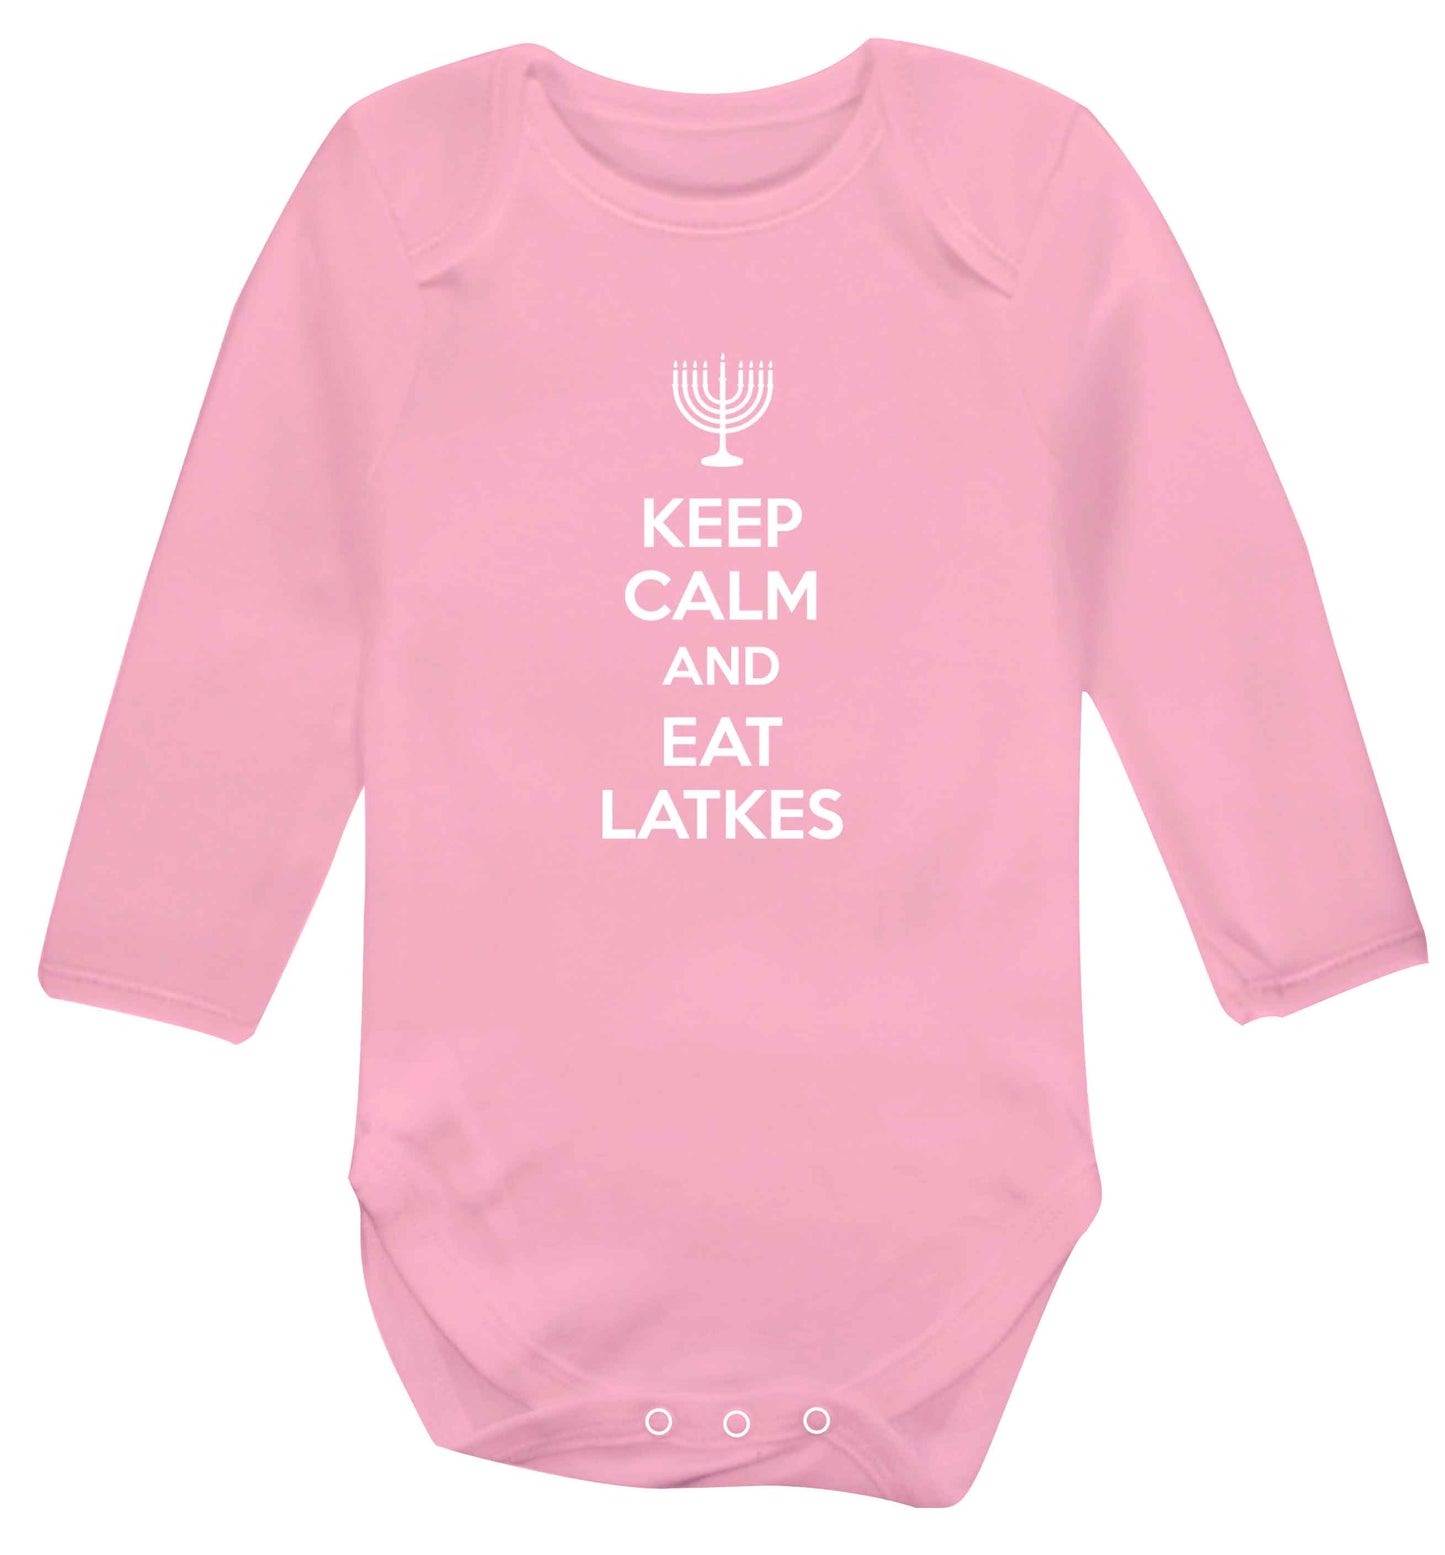 Keep calm and eat latkes baby vest long sleeved pale pink 6-12 months